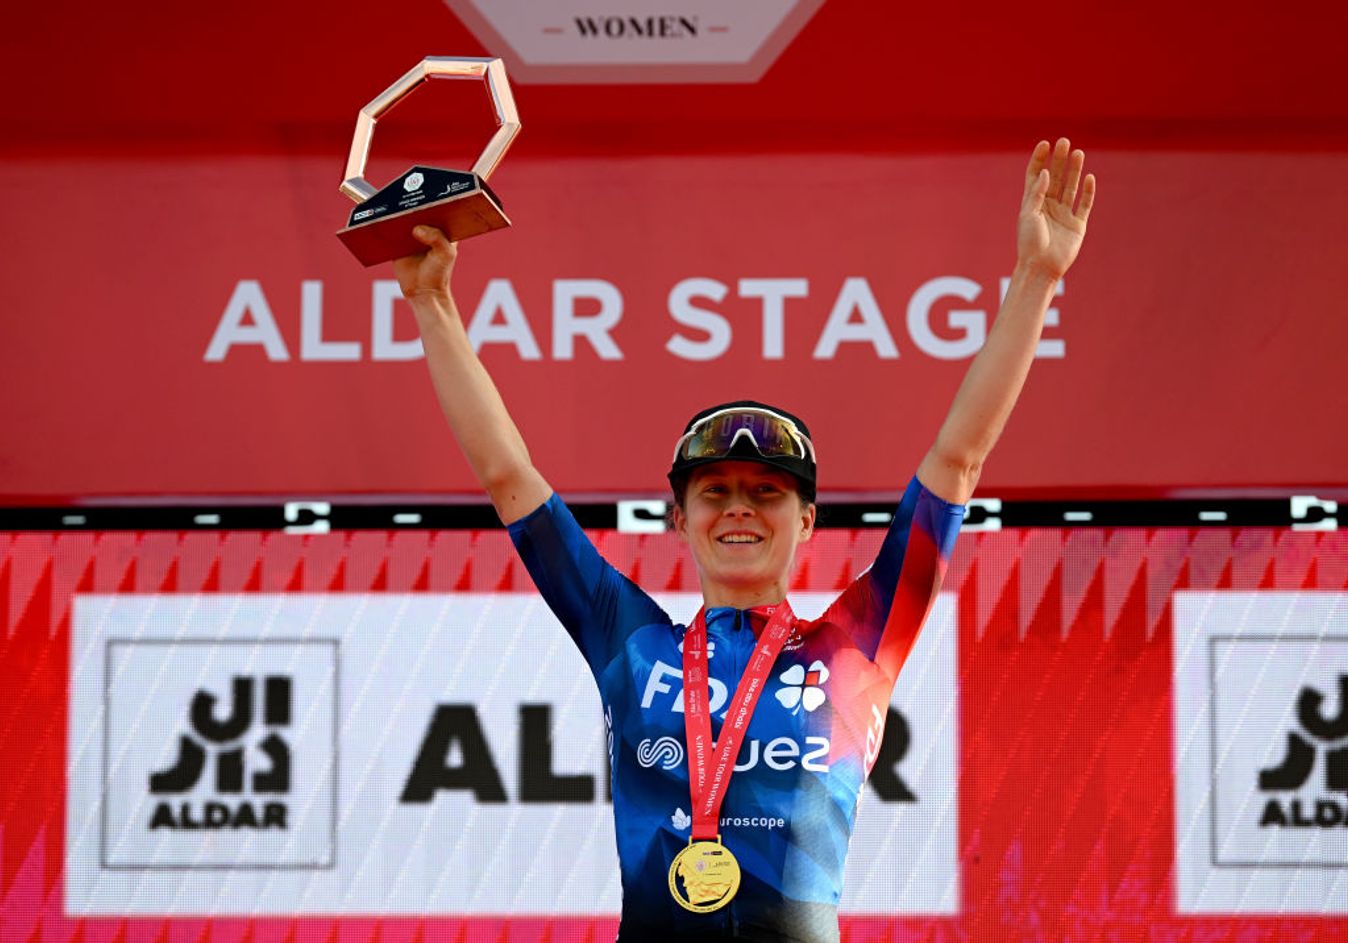 Amber Kraak on the podium as winner of stage 4 of the UAE Tour Women